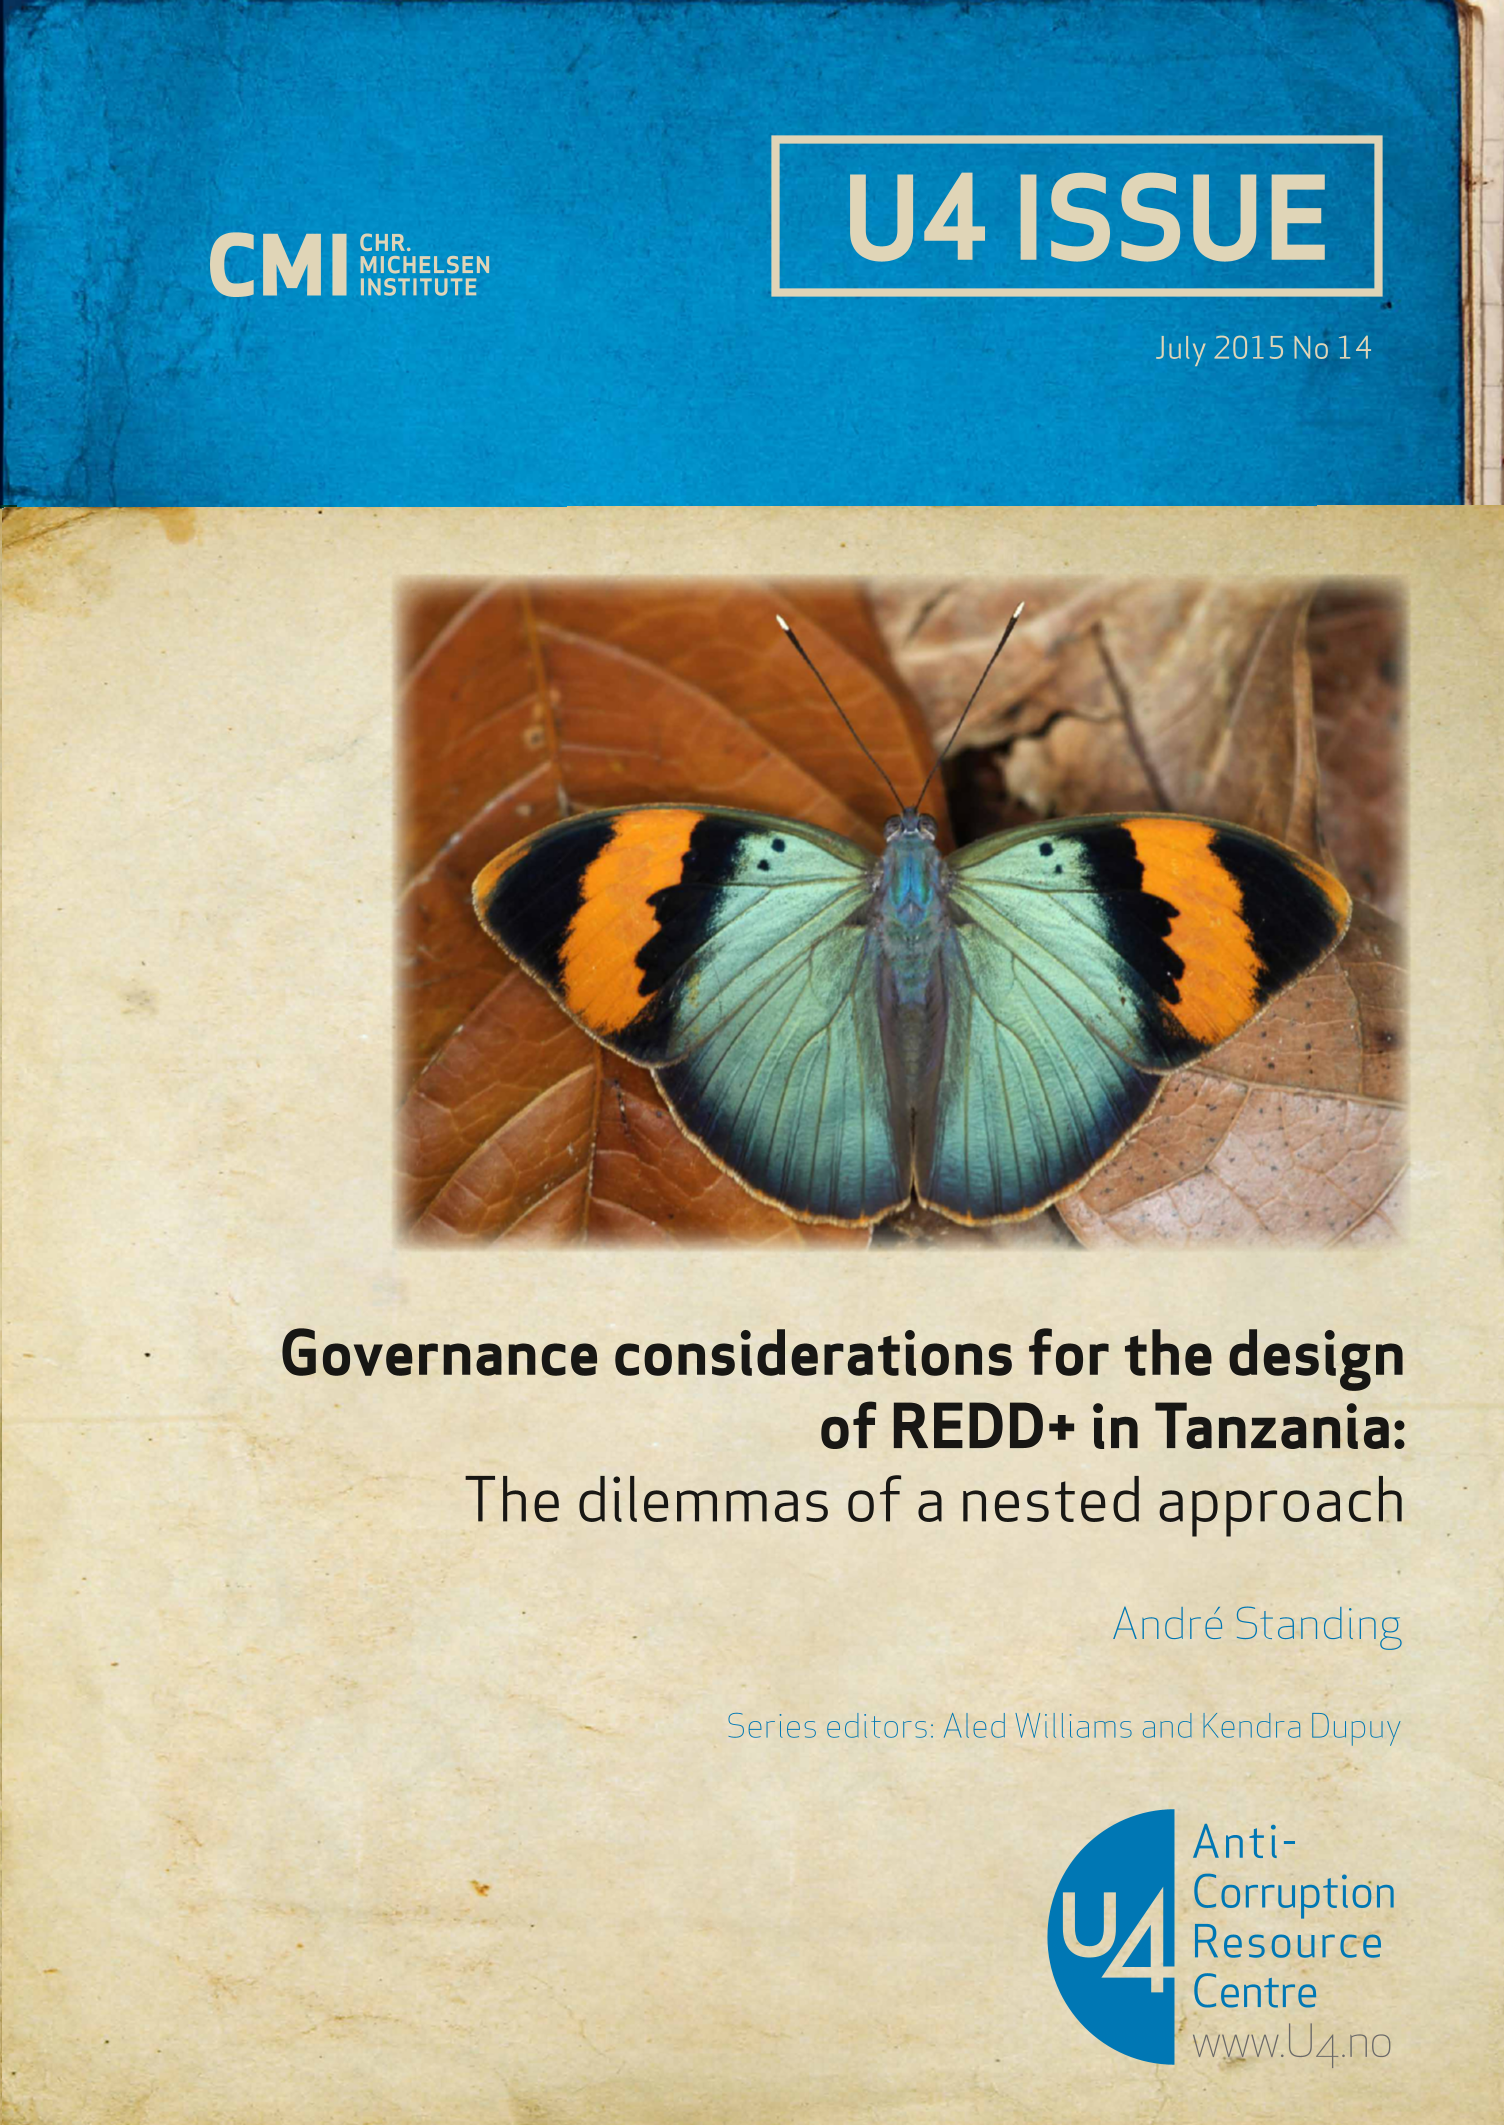 Governance considerations for the design of REDD+ in Tanzania: The dilemmas of a nested approach